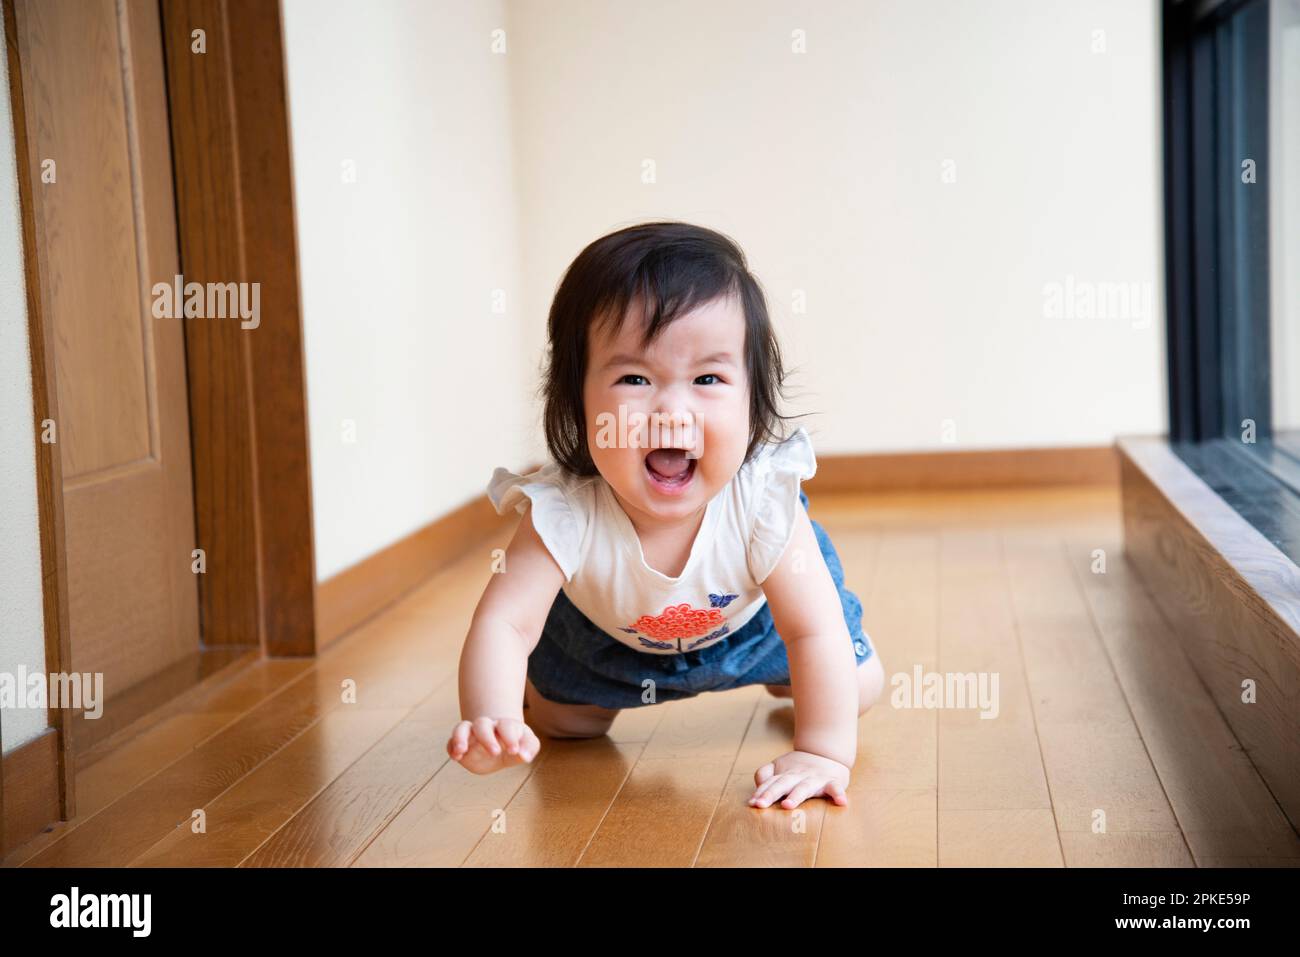 Baby crawling on the flooring Stock Photo